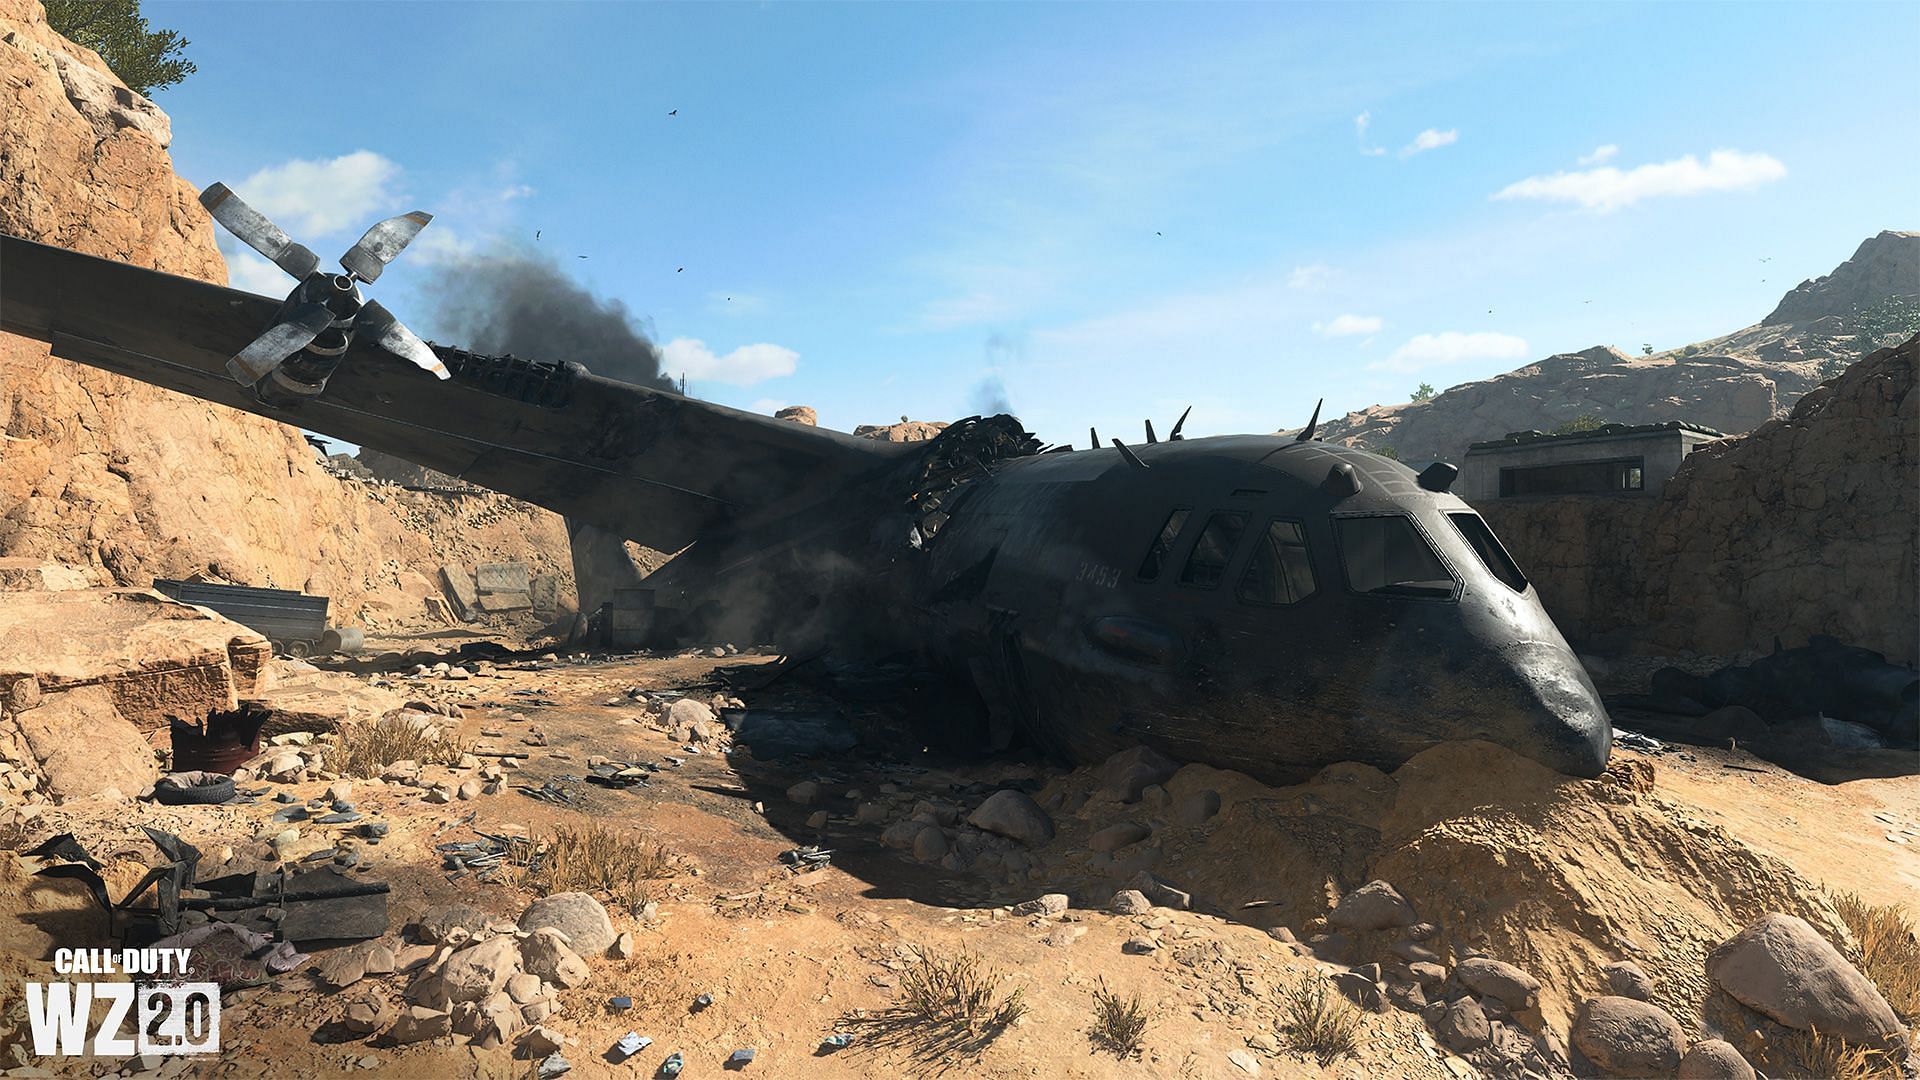 The crashed plane from Afghan is joining the outside area of Sattiq Caves in Warzone 2 (Image via Activision)